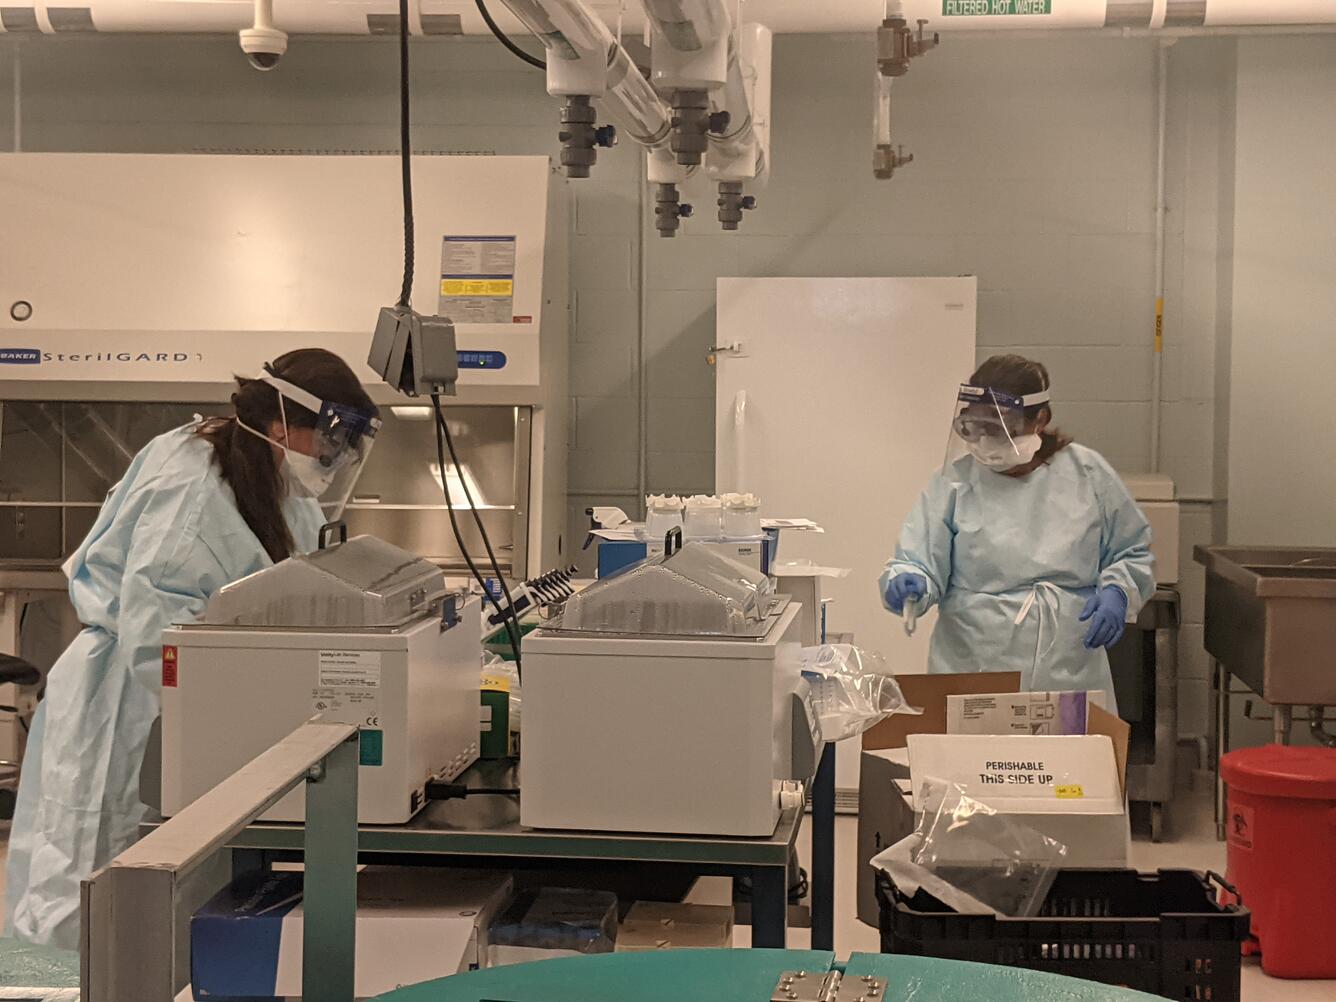 Two women in full protective gear work on samples in a lab.